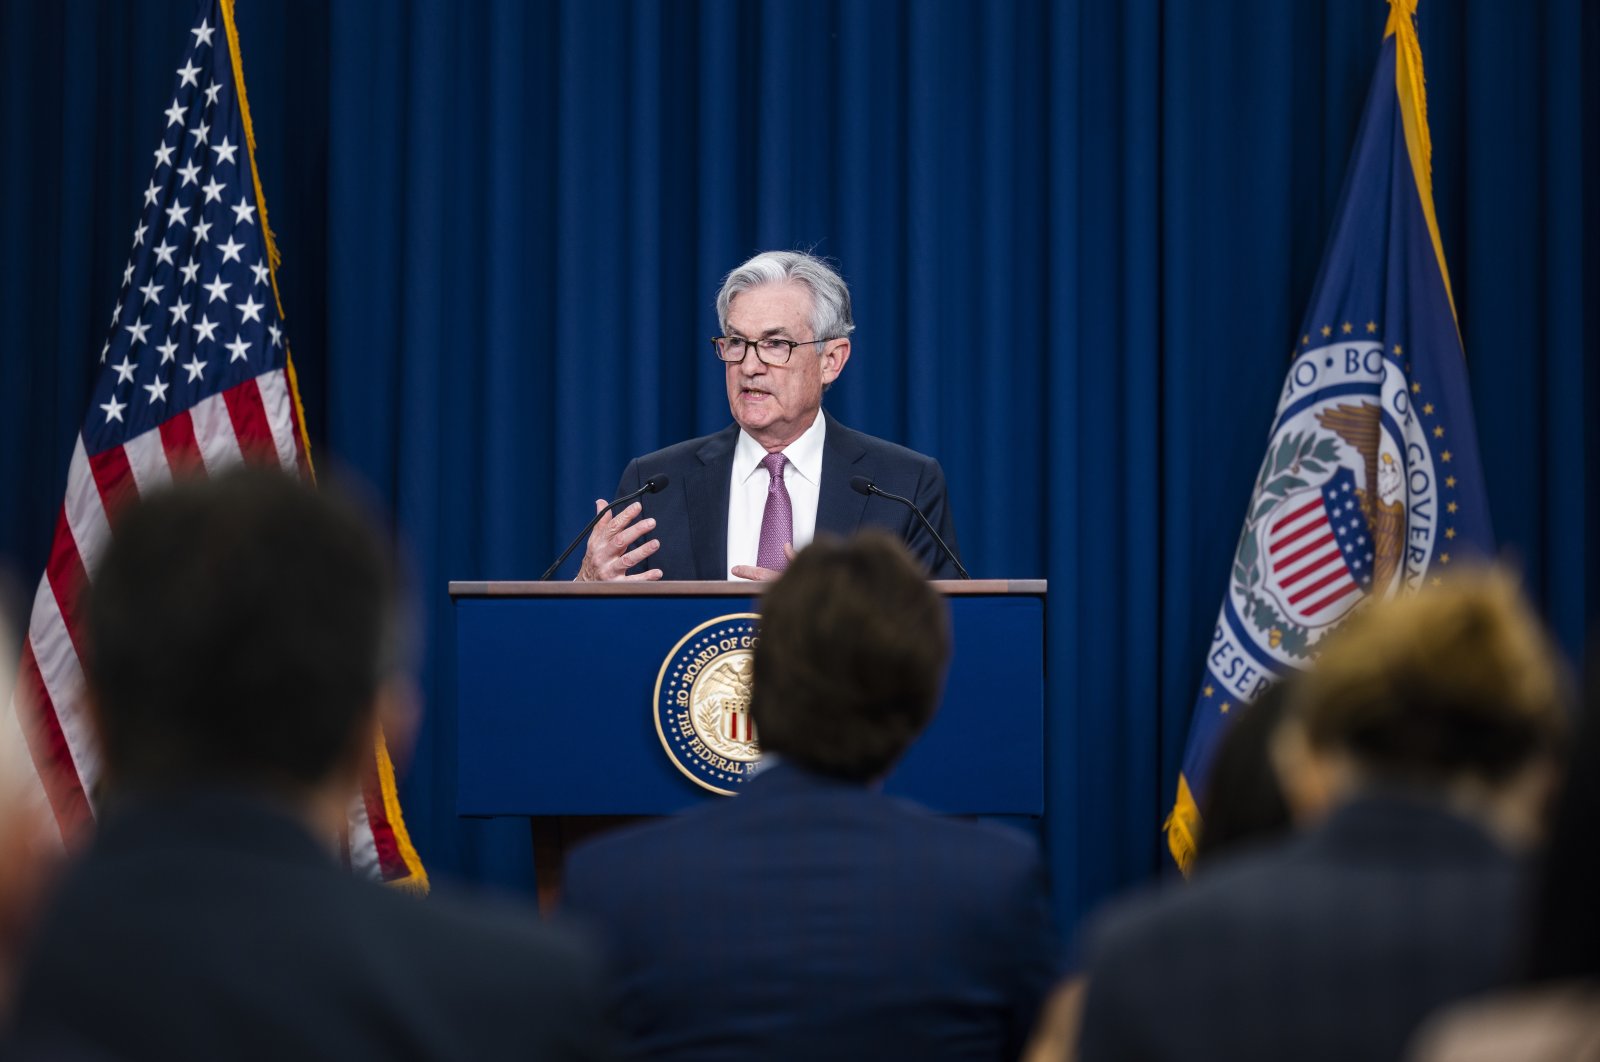 Federal Reserve Chair Jerome Powell holds a news conference after the Fed agreed to raise interest rates by half a percentage point at the William McChesney Martin Jr. Building in Washington, D.C., U.S., May 4, 2022. (EPA Photo)